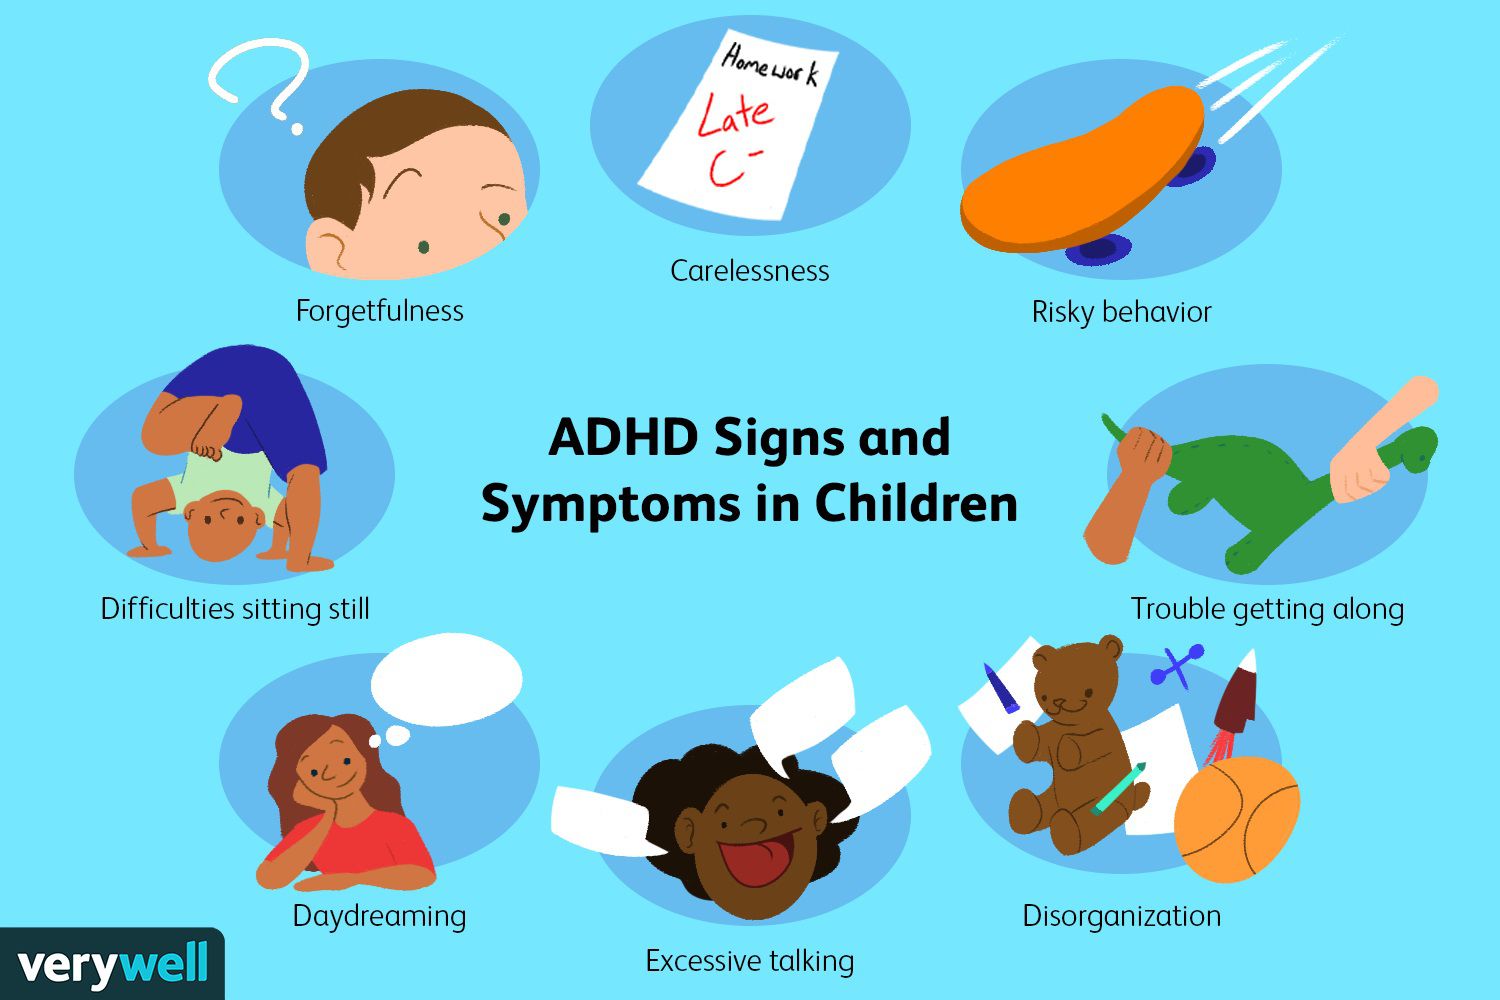 What medications are available to treat ADHD symptoms?